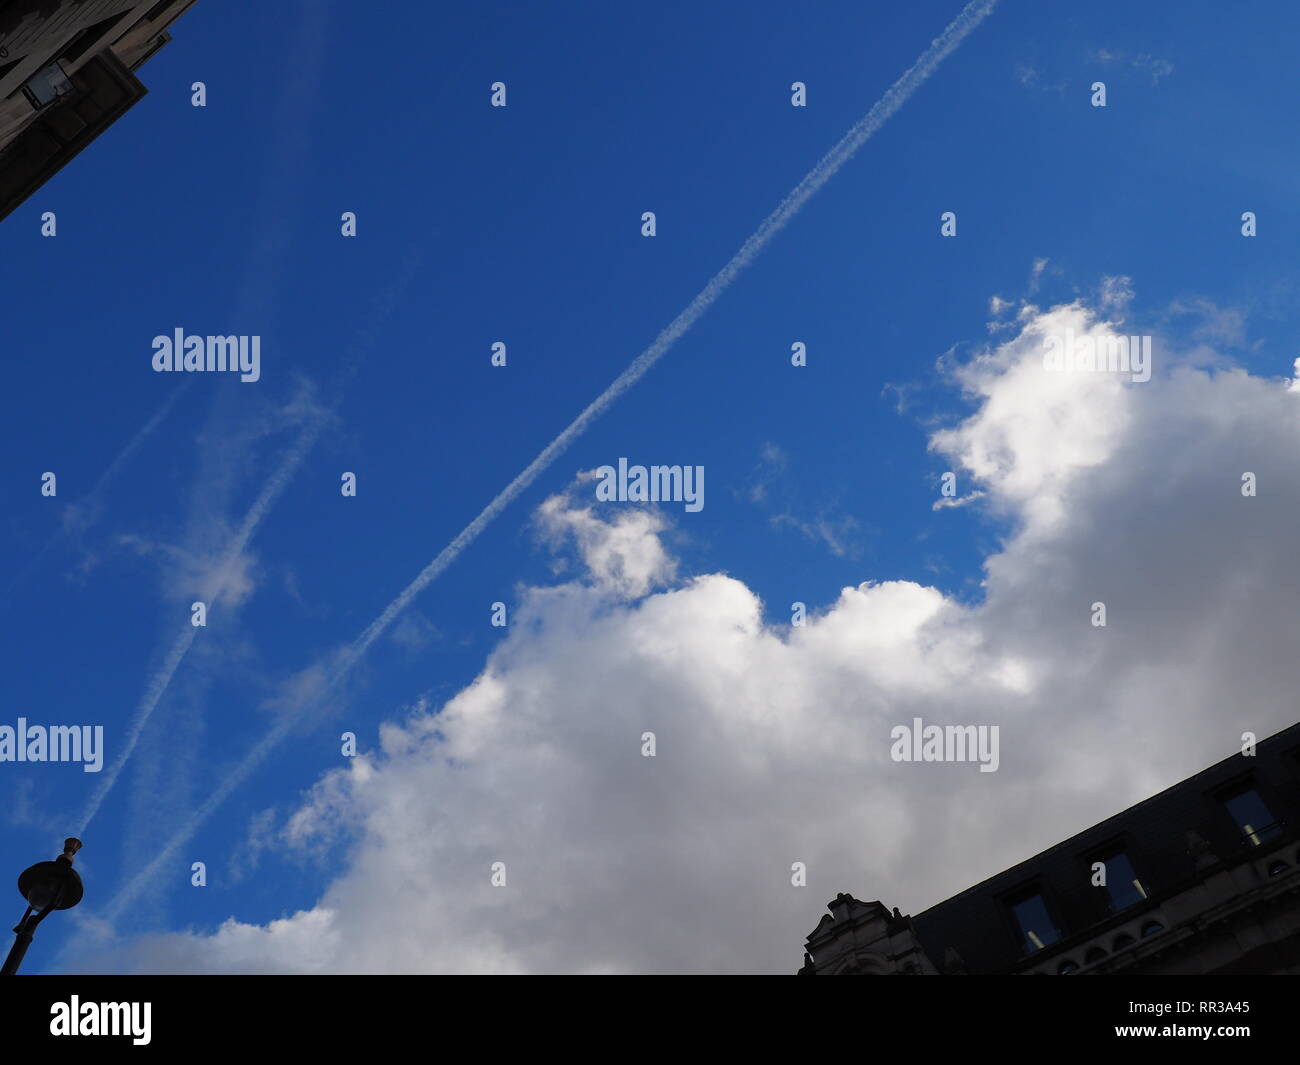 Geo-engineering spray to form clouds over Oxford Street,London. Jets spraying in the Spring sky. Stock Photo